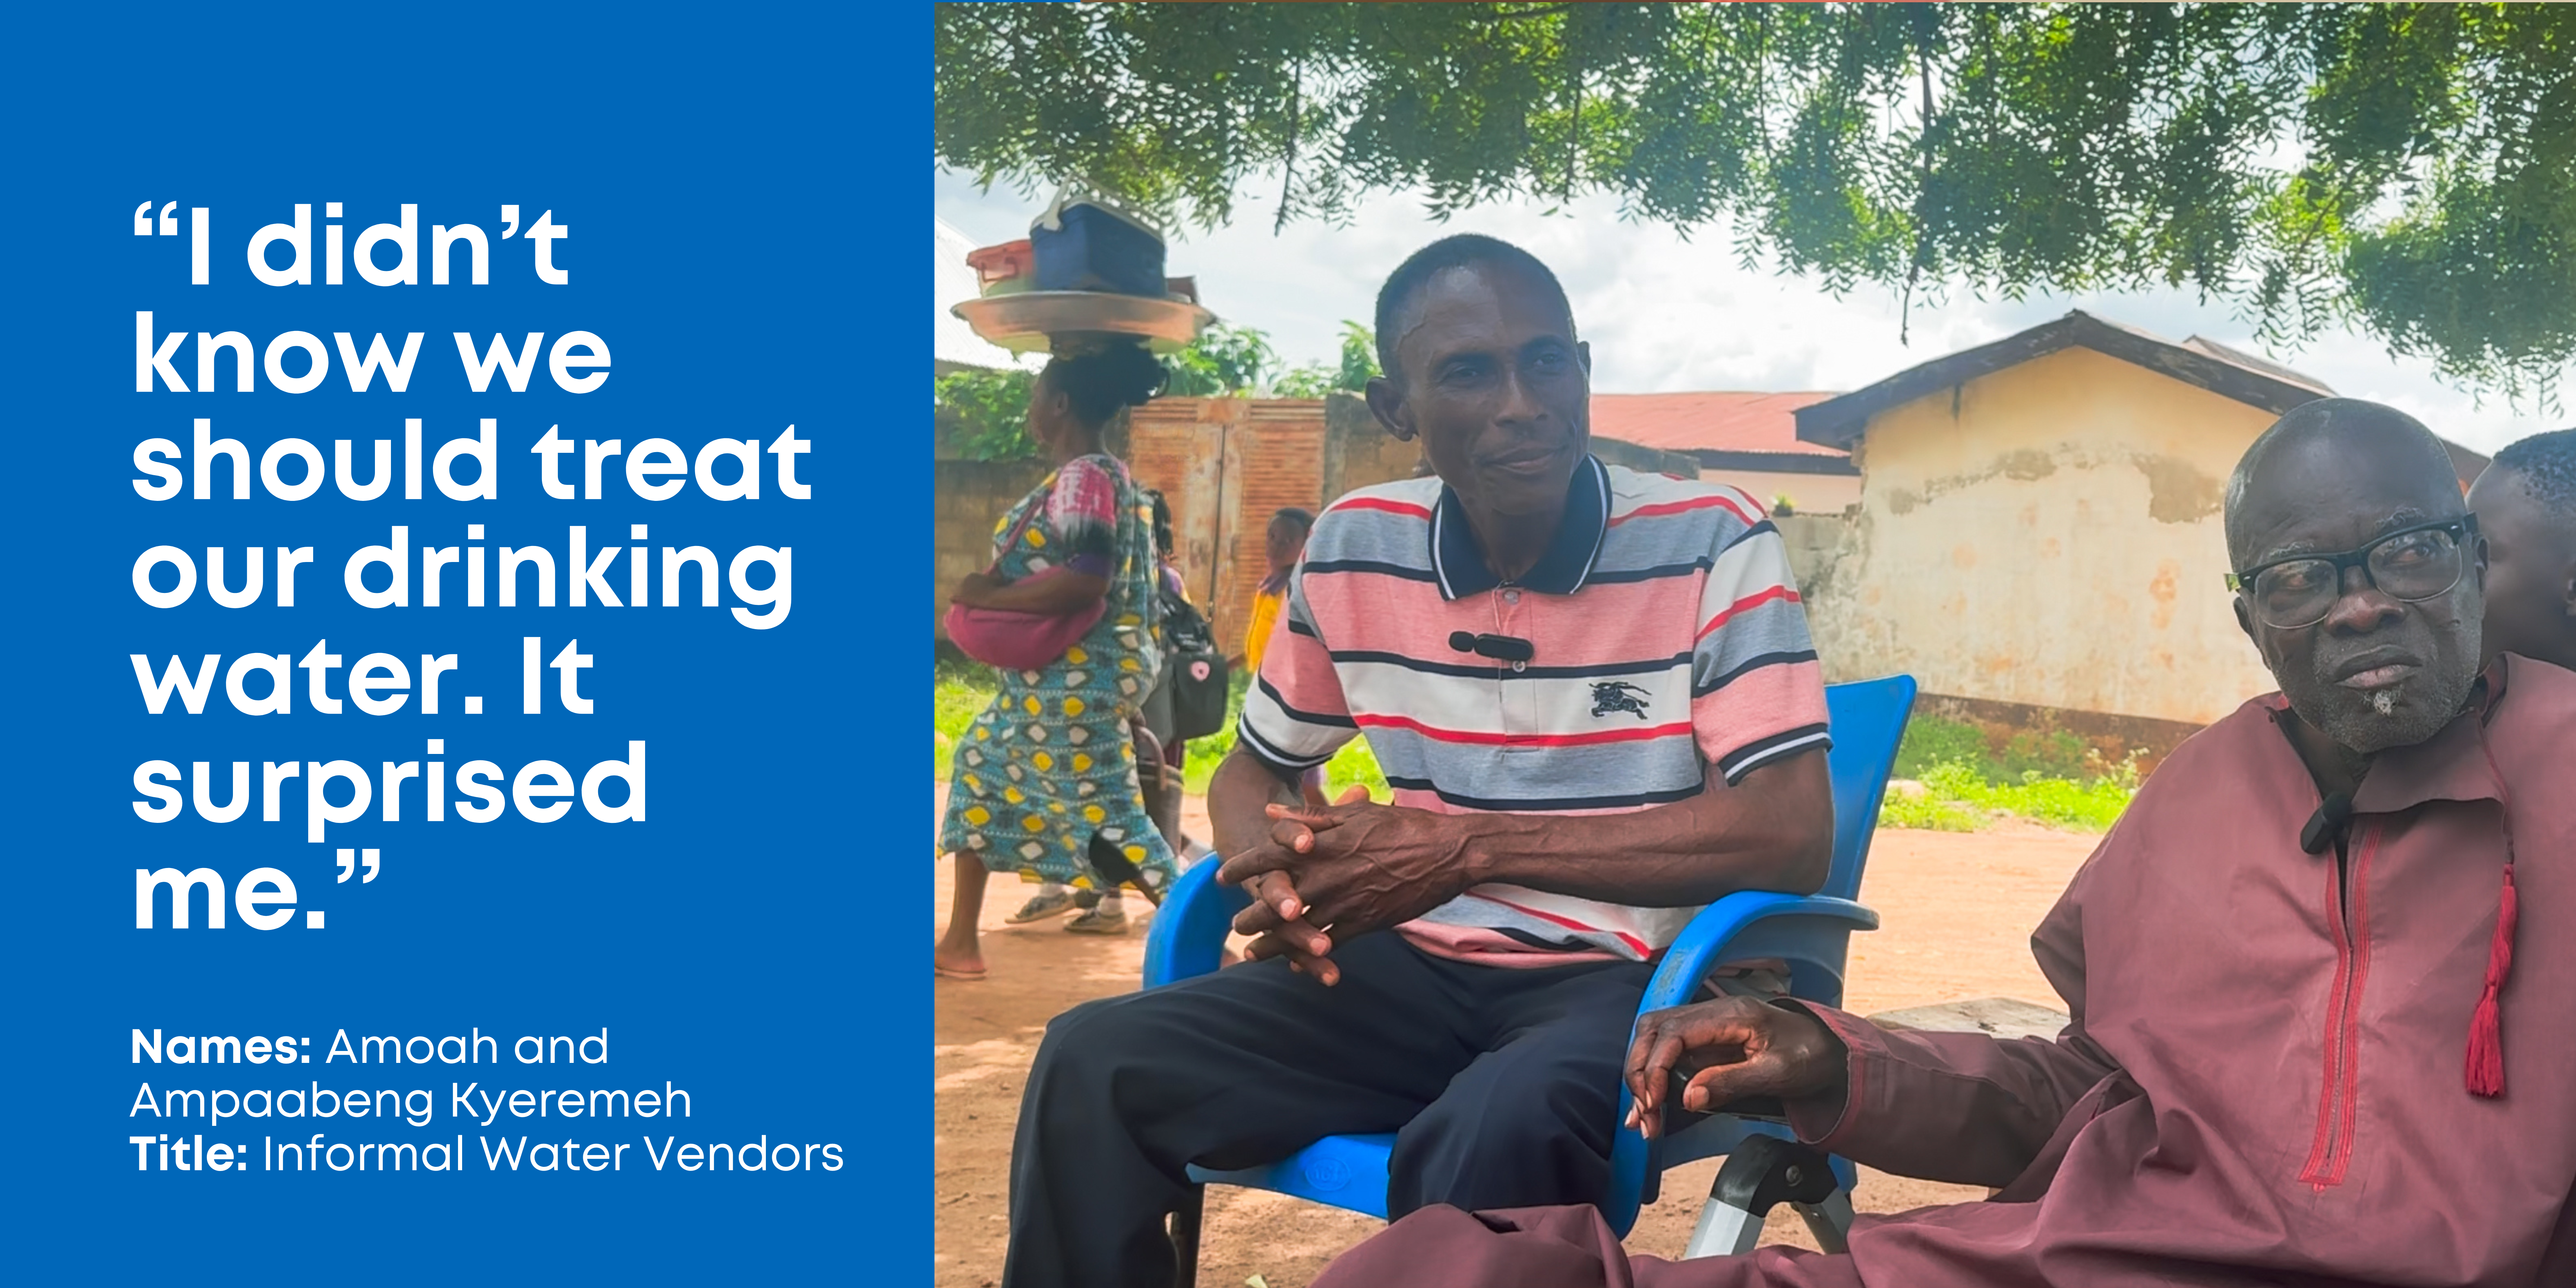 Two informal water vendors, Amoah and Ampaabeng Kyeremeh sit under a tree in plastic chairs and say: "I didn't know we should treat our drinking water. It surprised me."